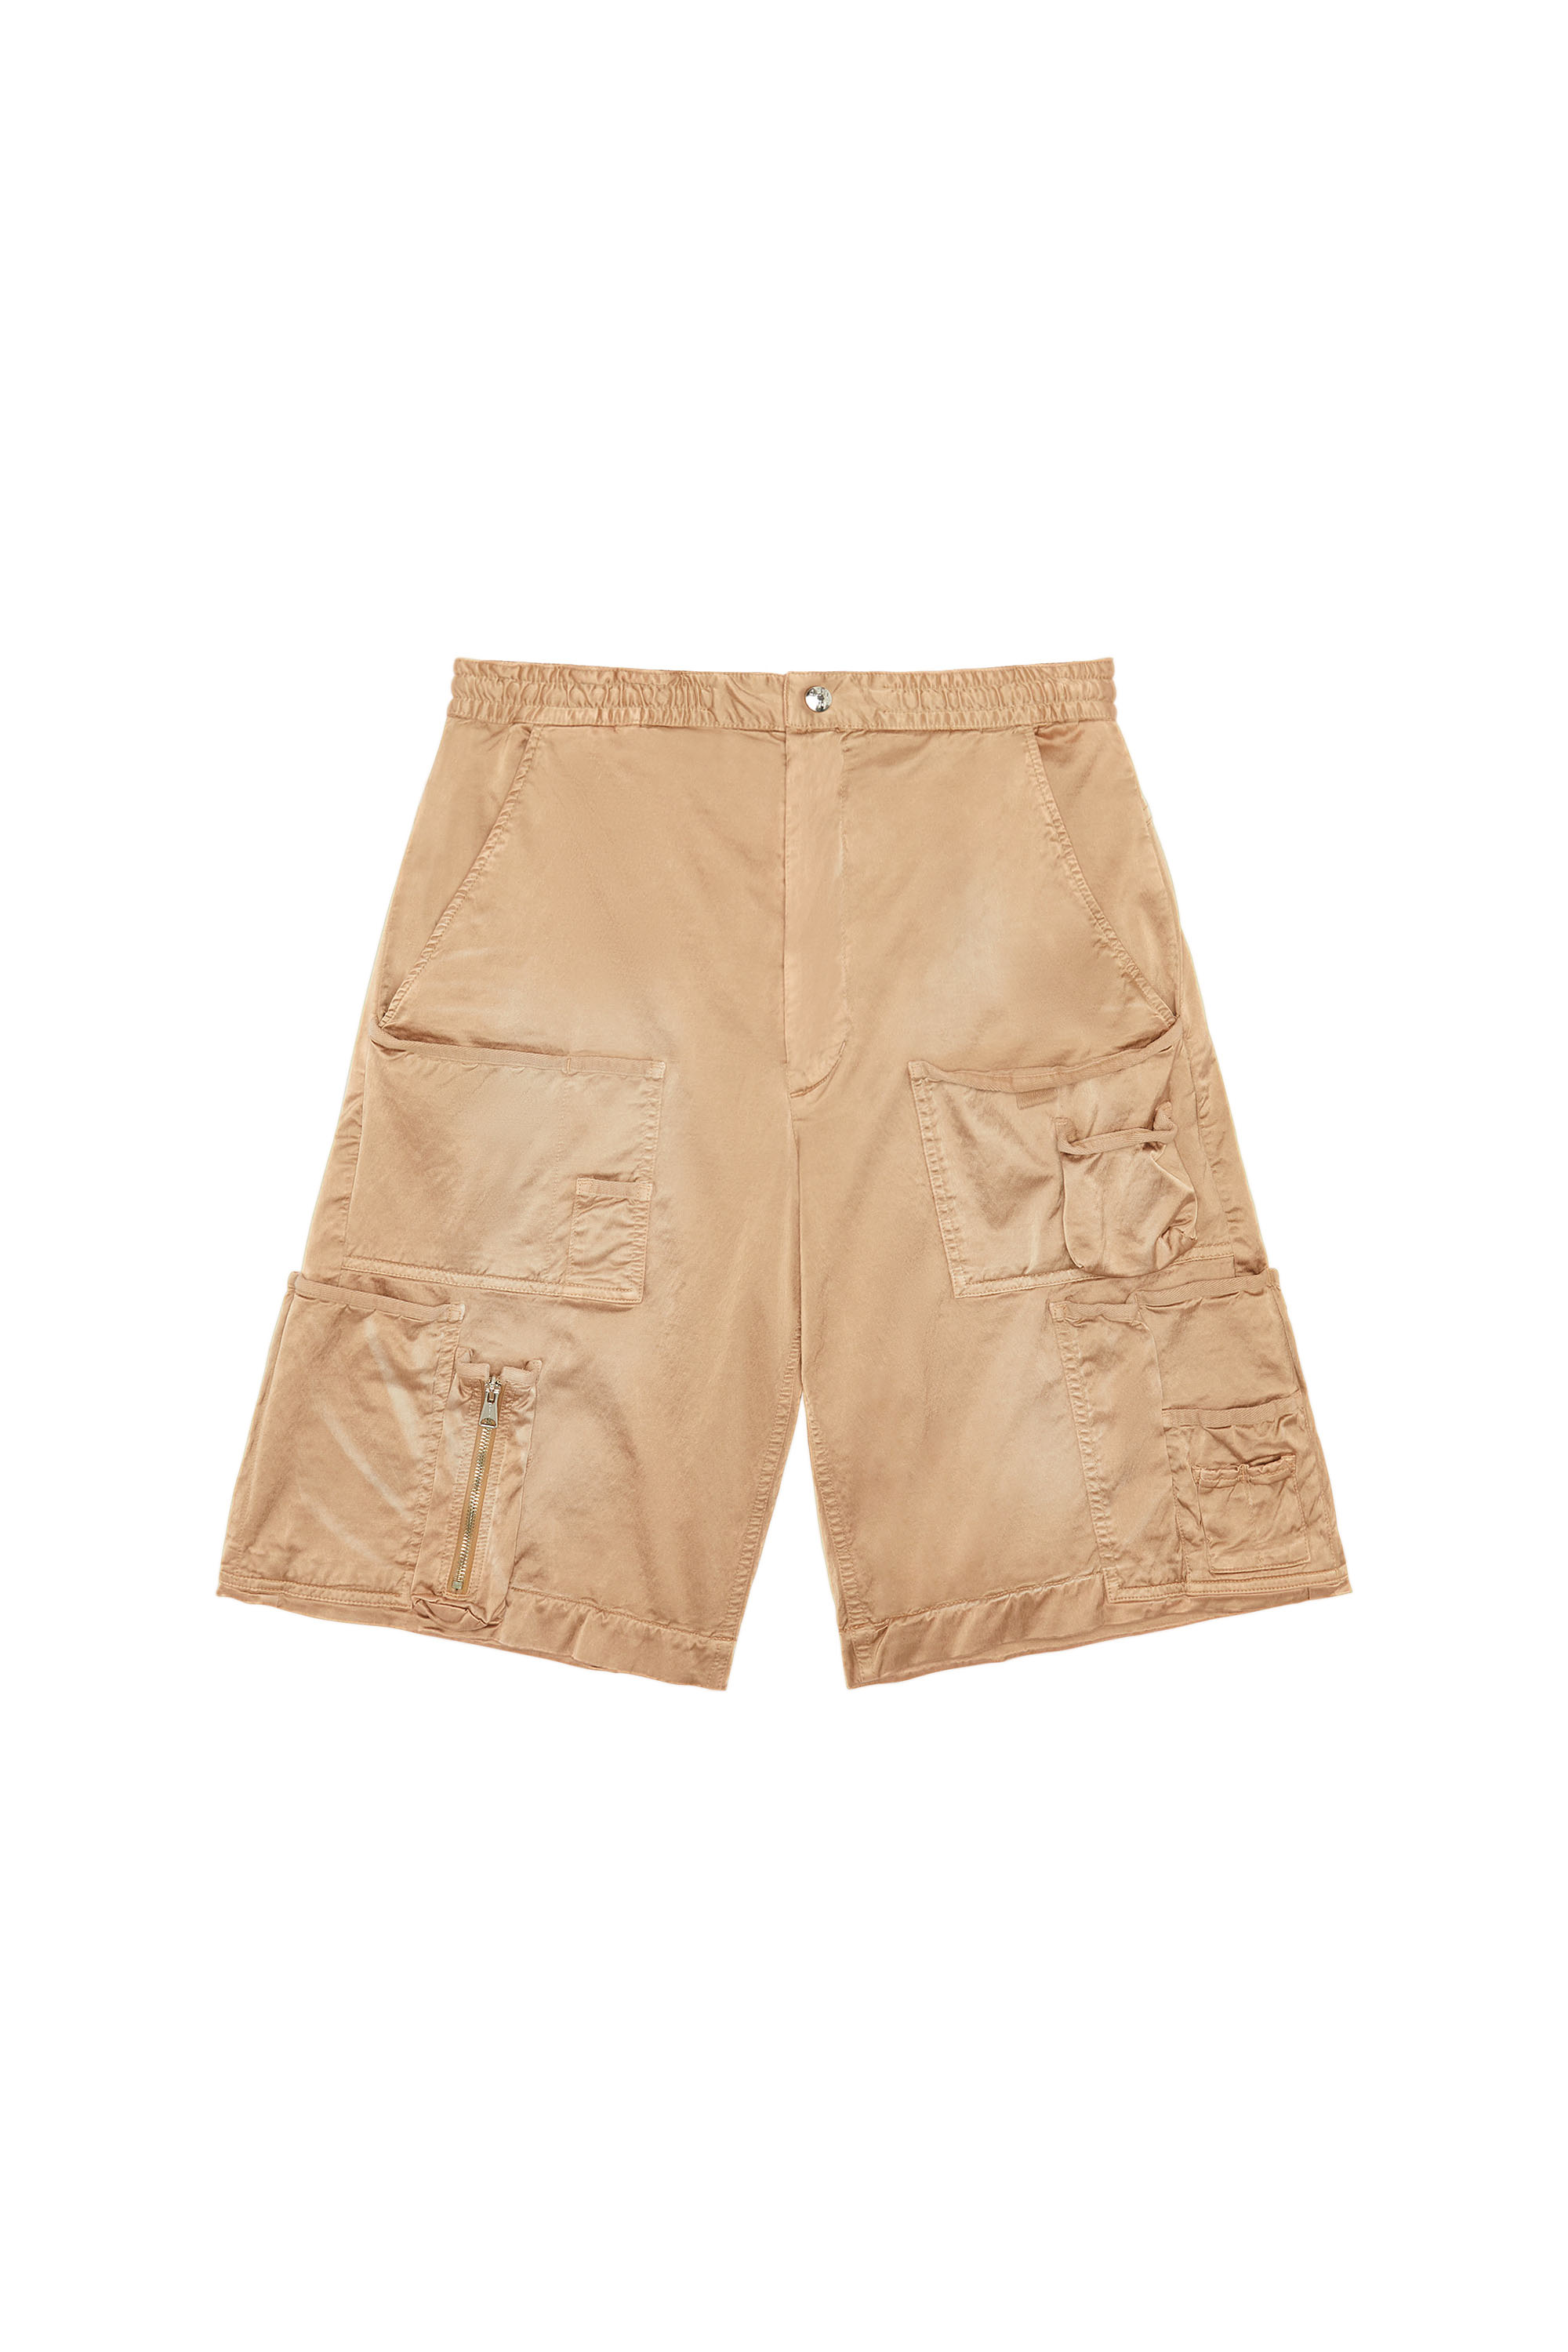 P-TANSEY, Beige - Shorts